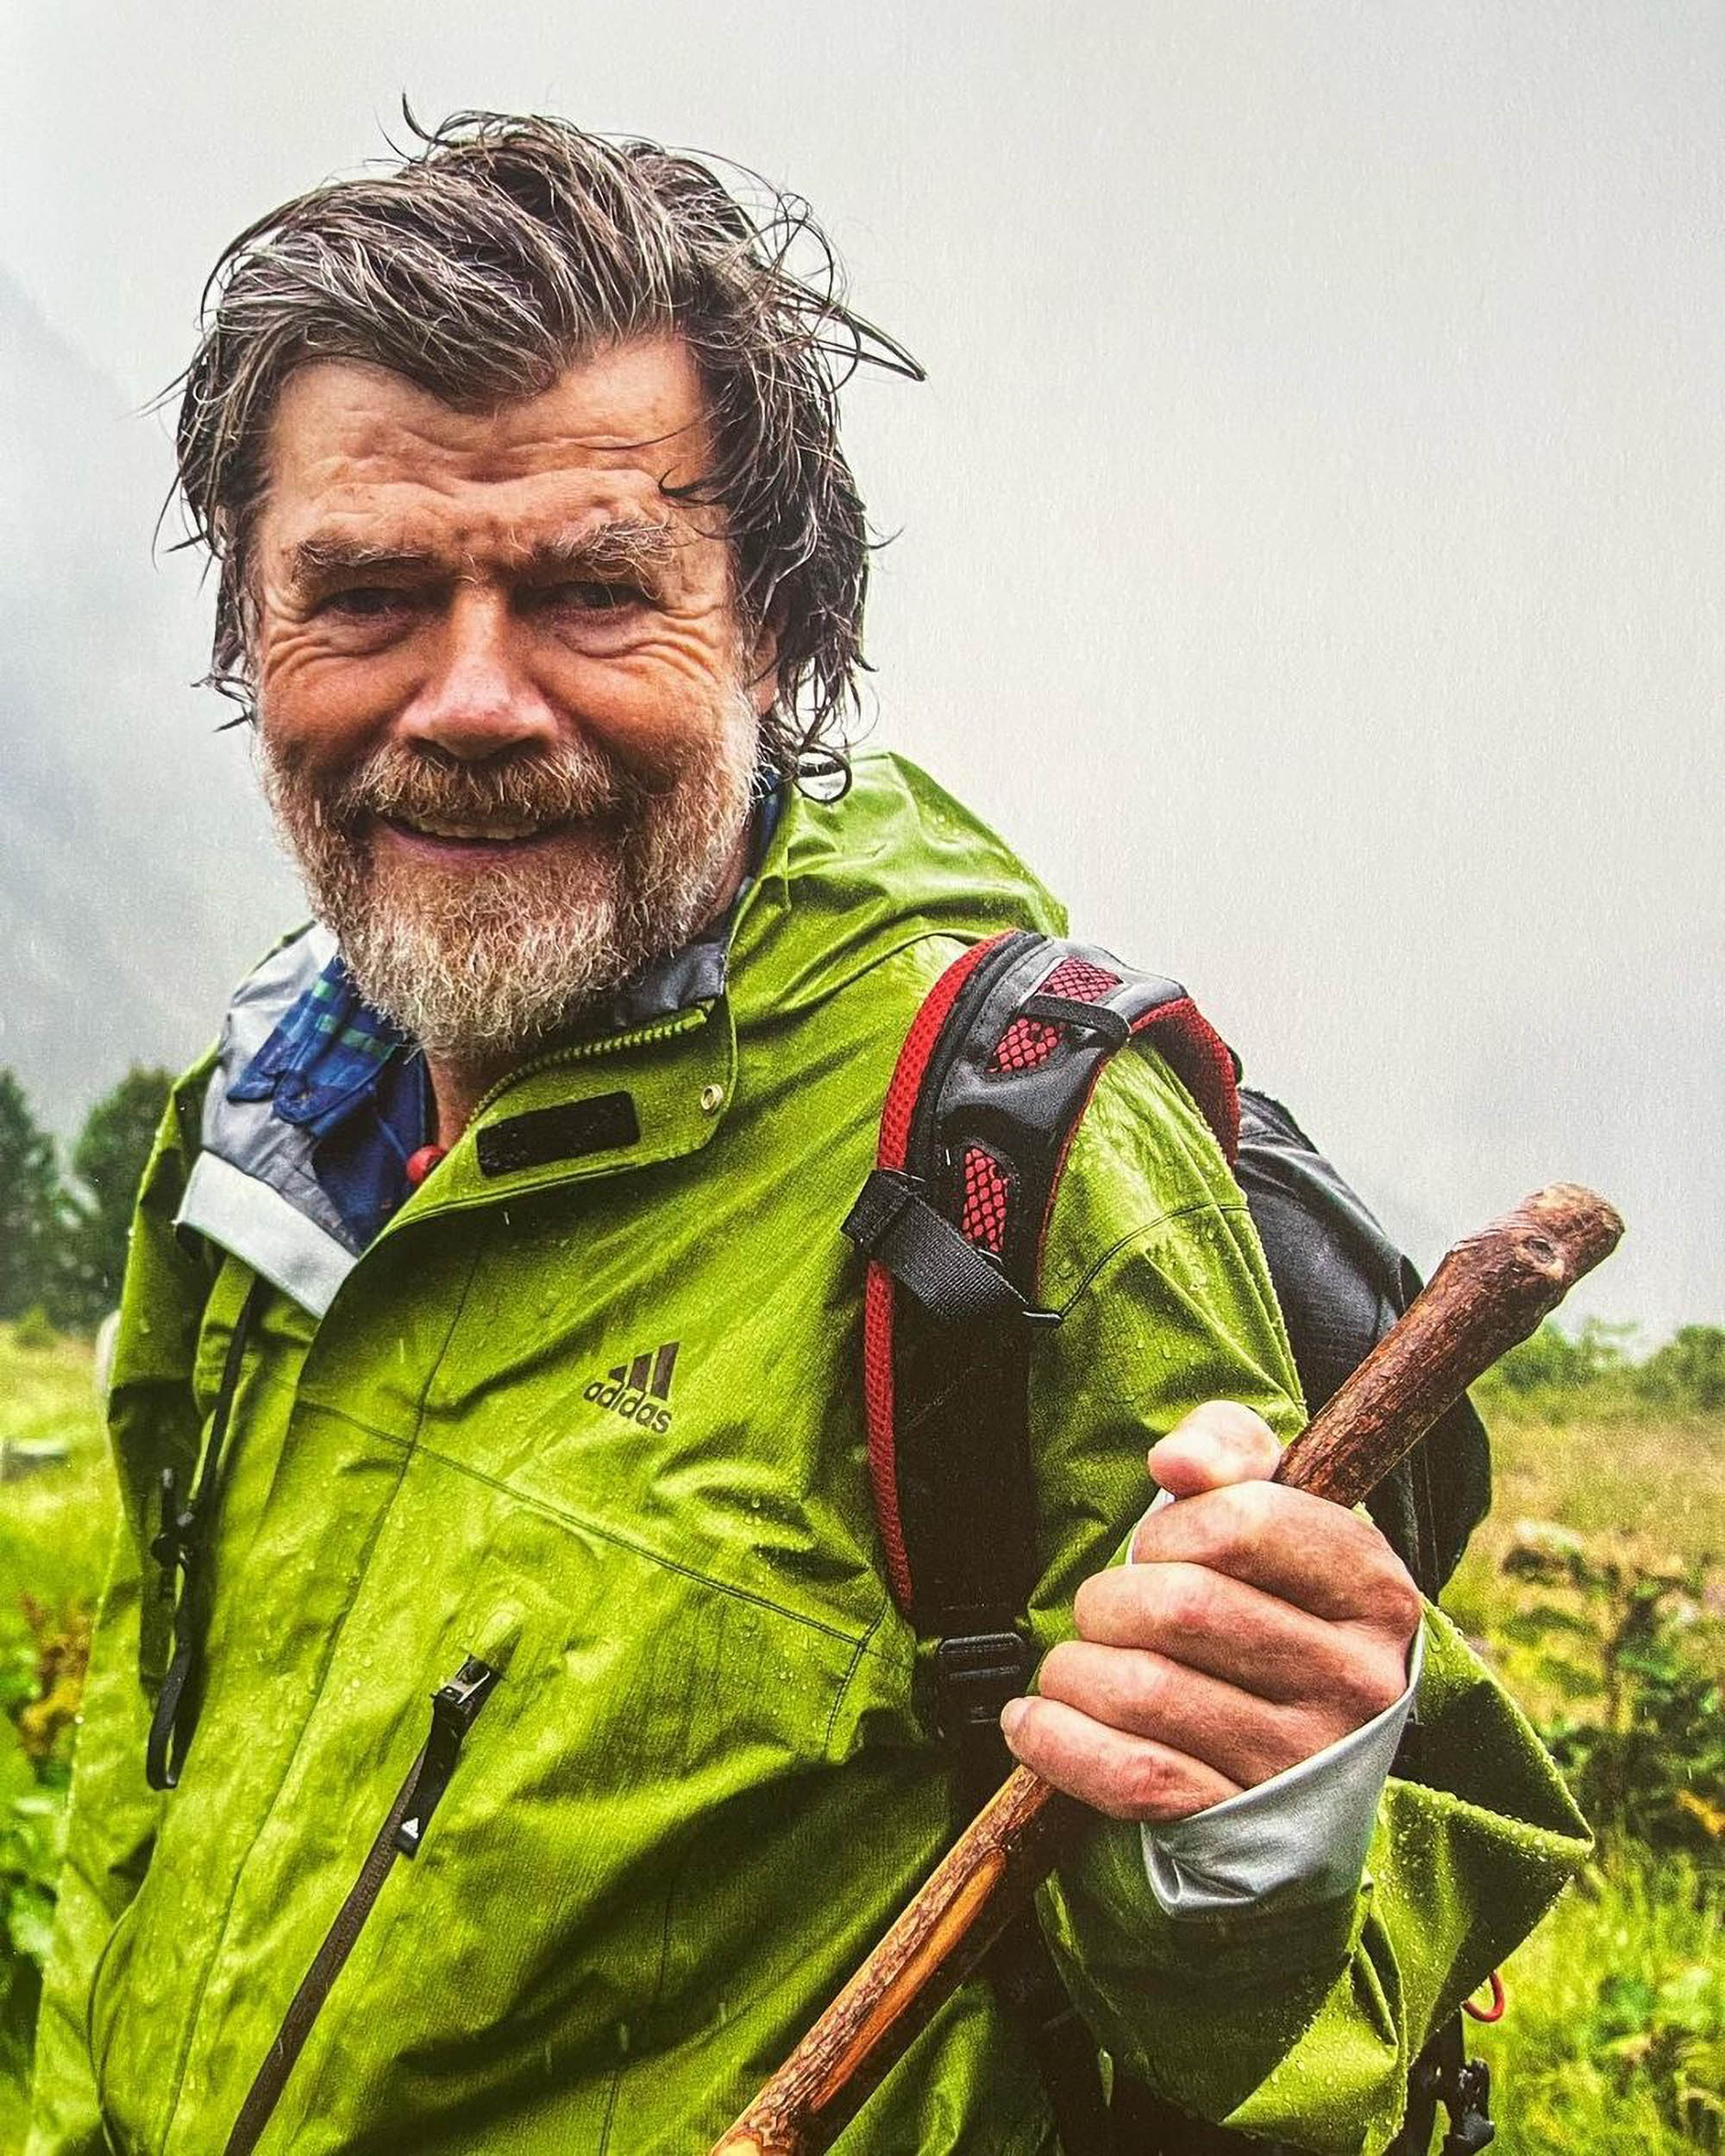 Montaineer Stripped Of World Records After Map Expert Says He Missed Peak